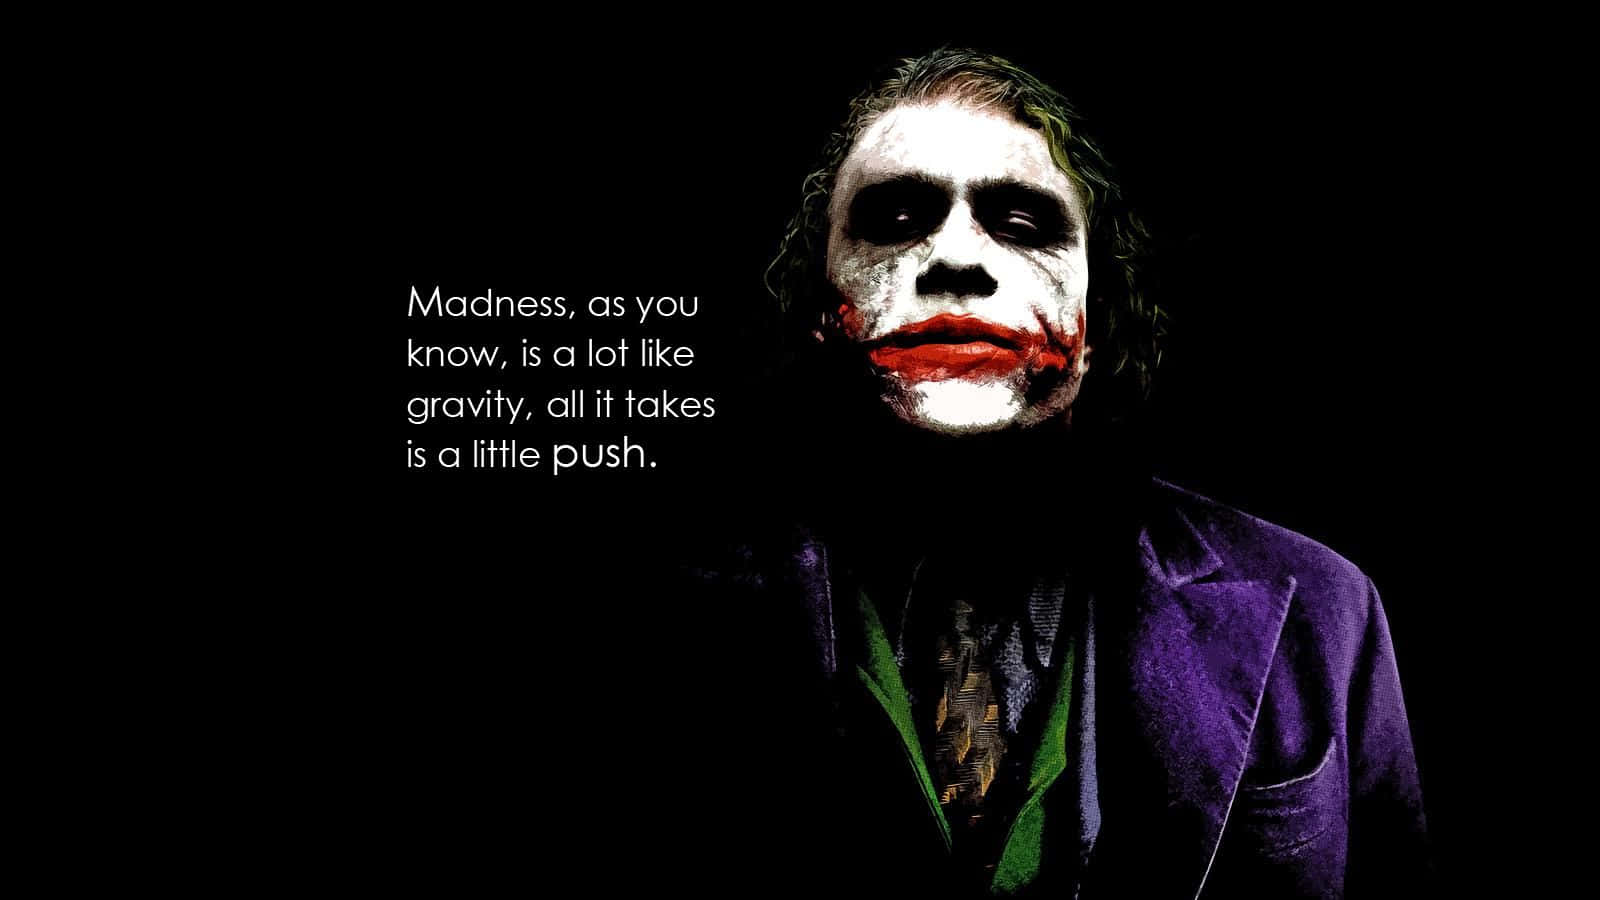 Joker Smiling with Thought-Provoking Quote Wallpaper